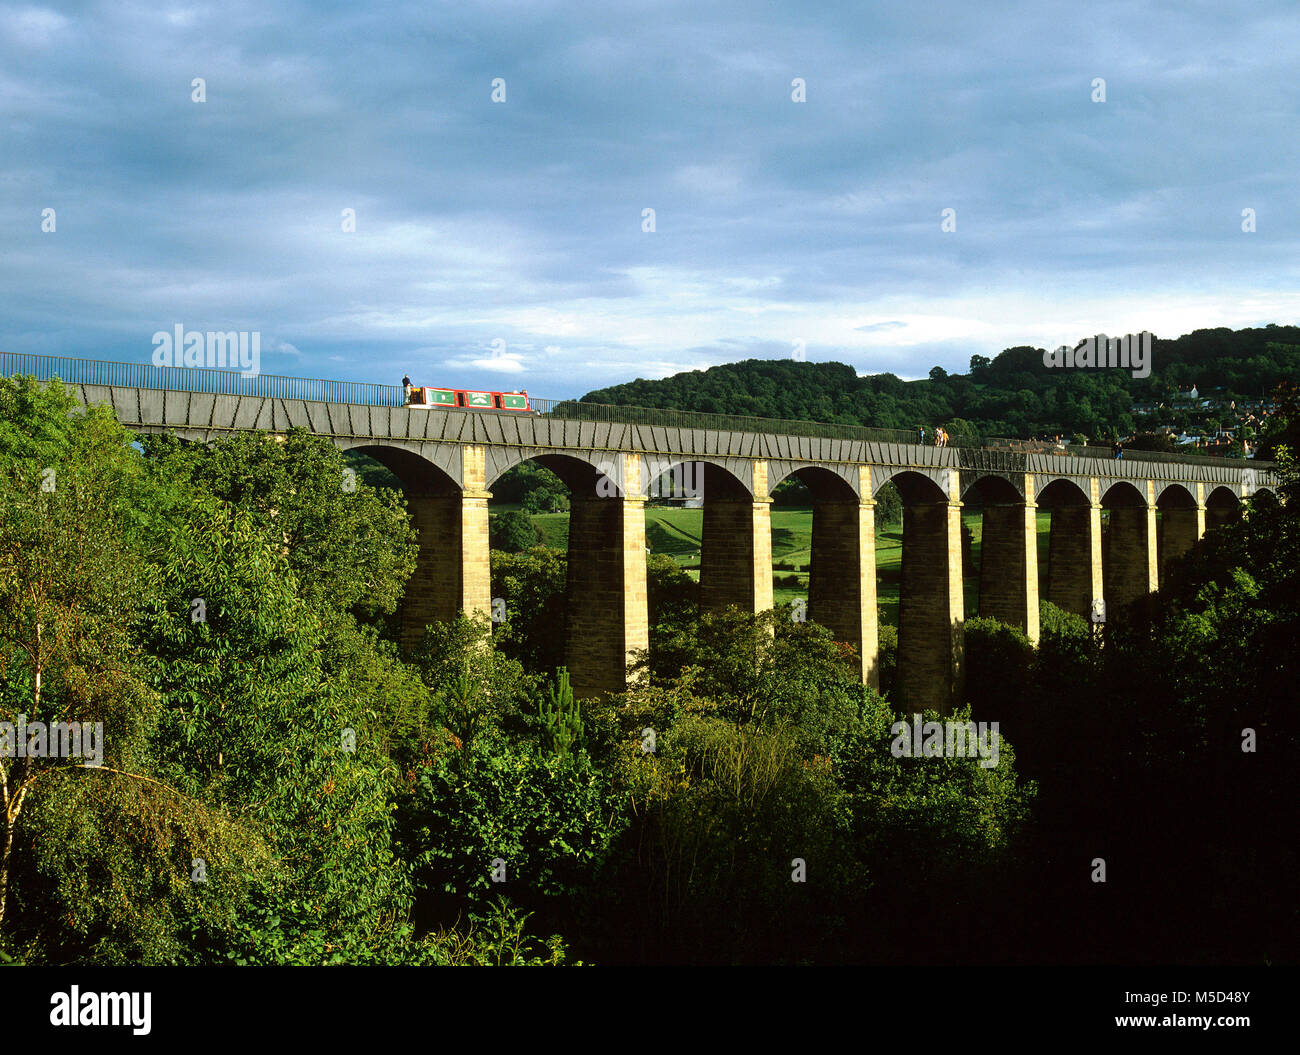 Pontcysyllte Aqueduct on the Llangollen Canal, Wrexham, North Wales, built by Thomas Telford and William Jessop and completed in 1805 Stock Photo